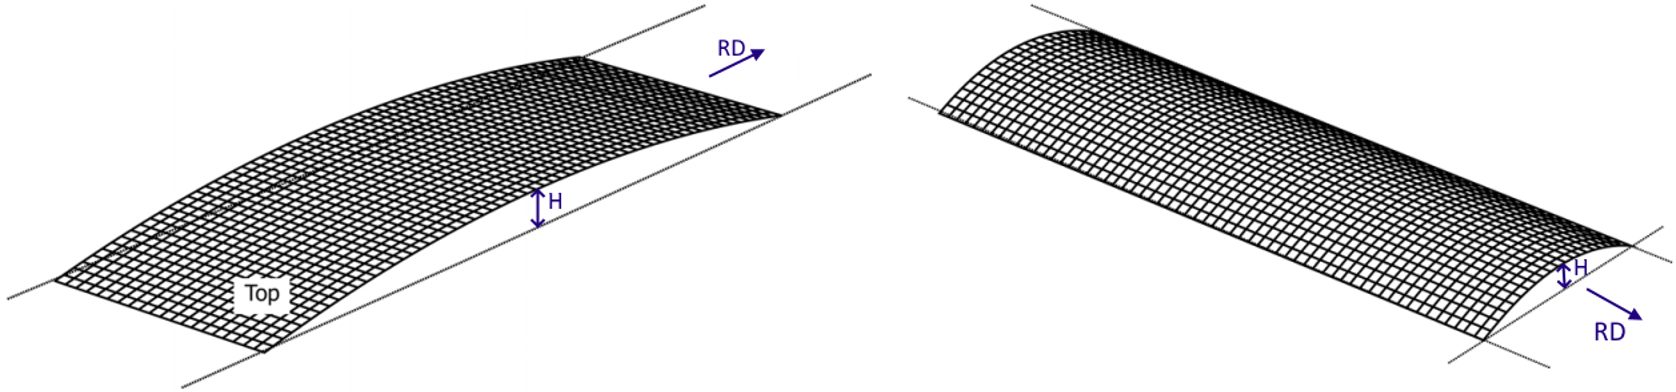 Figure 1: Coil shape imperfections – A) Coil set and B) CrossbowA-30